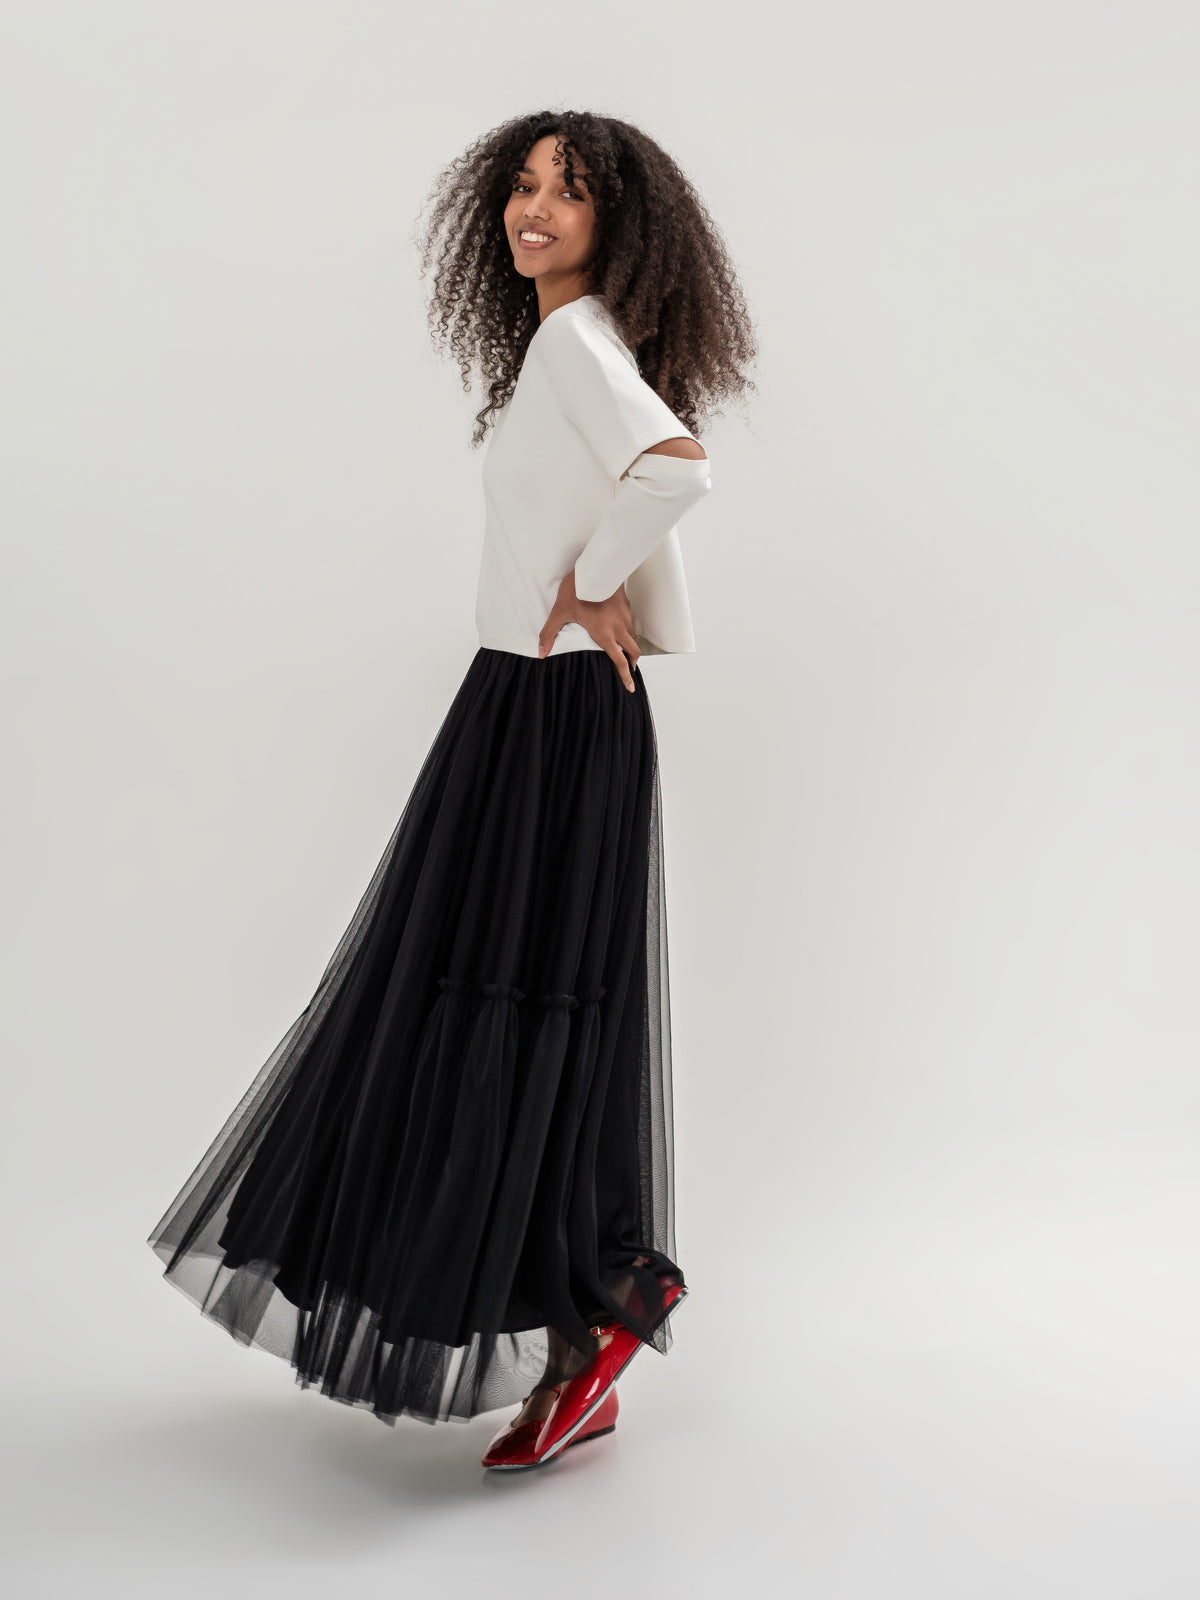 White top and black tulle lined skirt with elastic waist one size